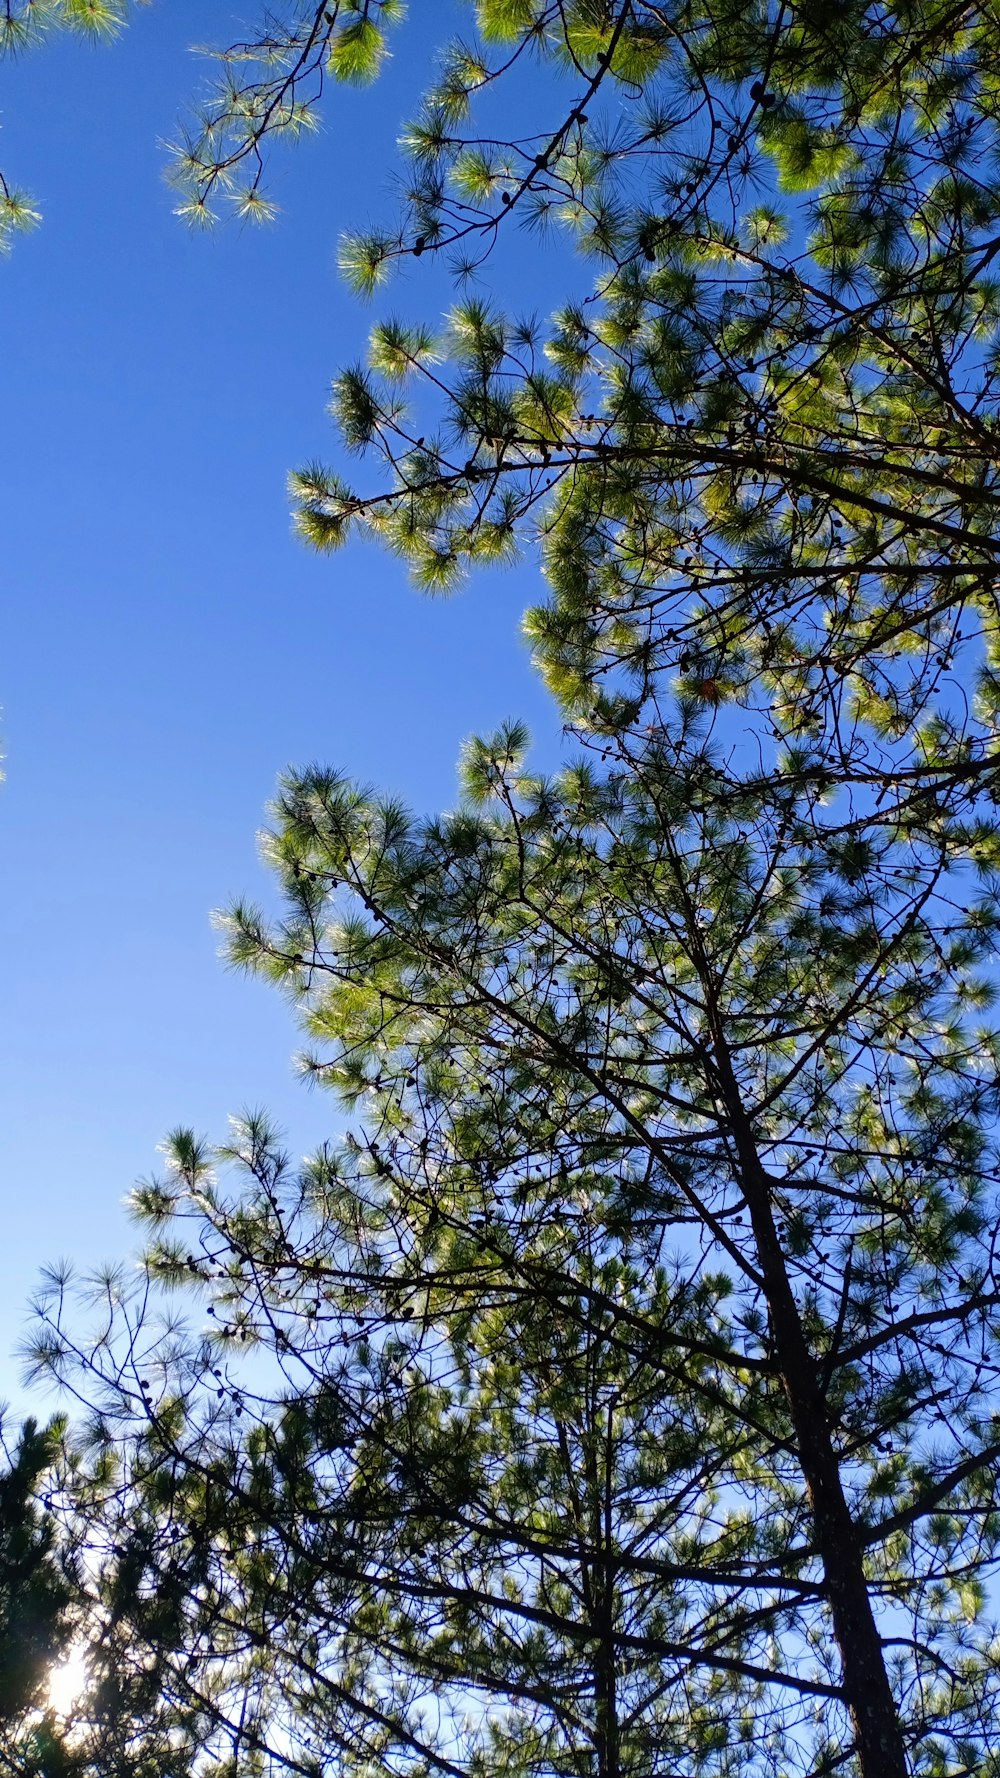 a clear blue sky with some trees in the foreground